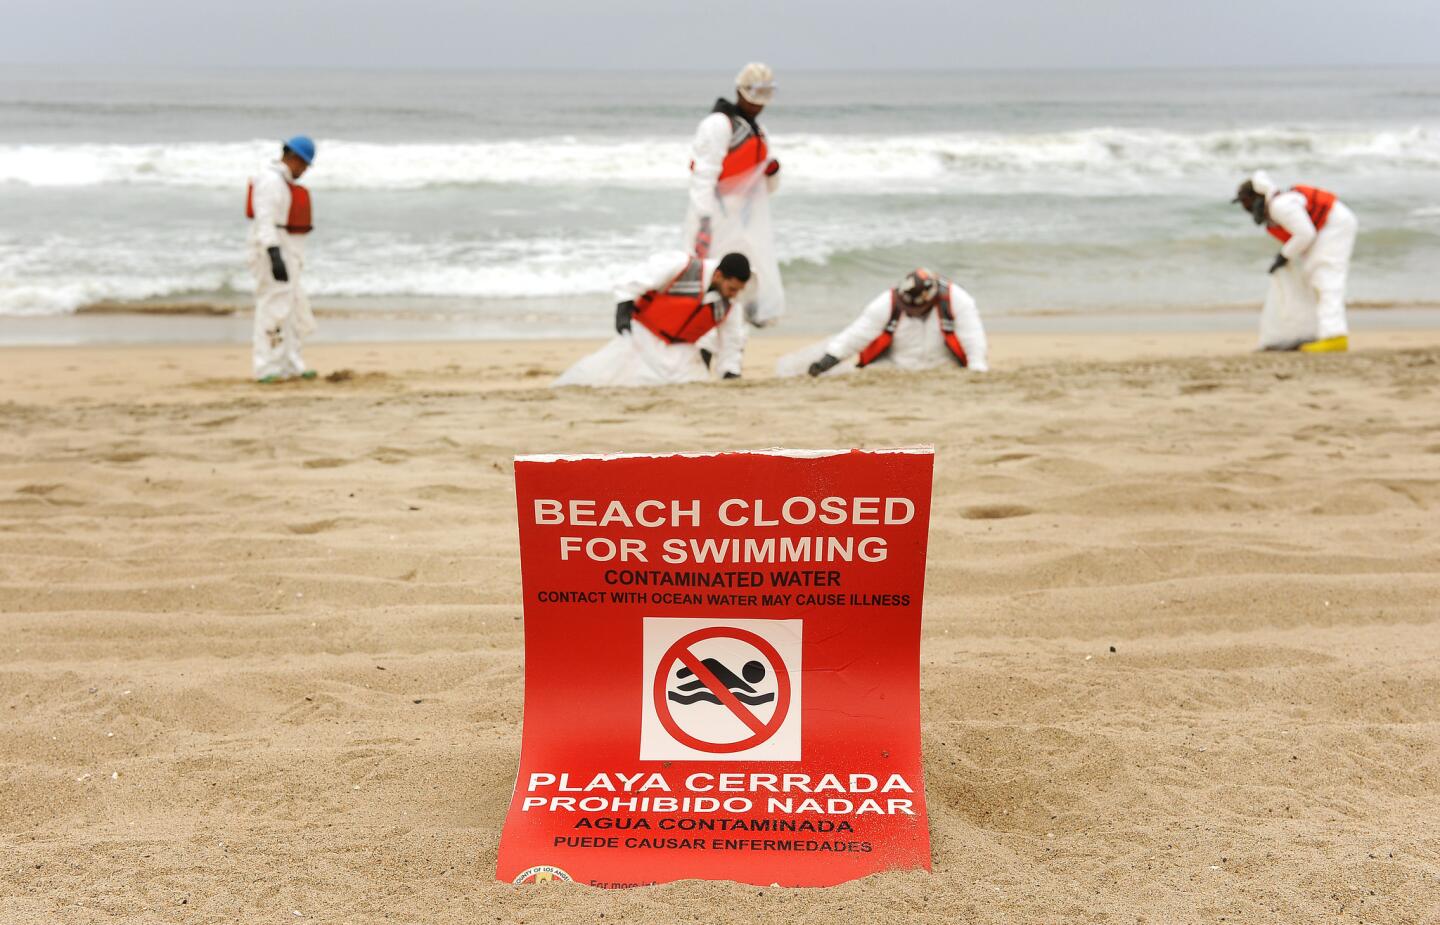 Posted signs warn people not to make contact with ocean water in Manhattan Beach on May 28 as workers clean up a tar-like substance along the South Bay shoreline.